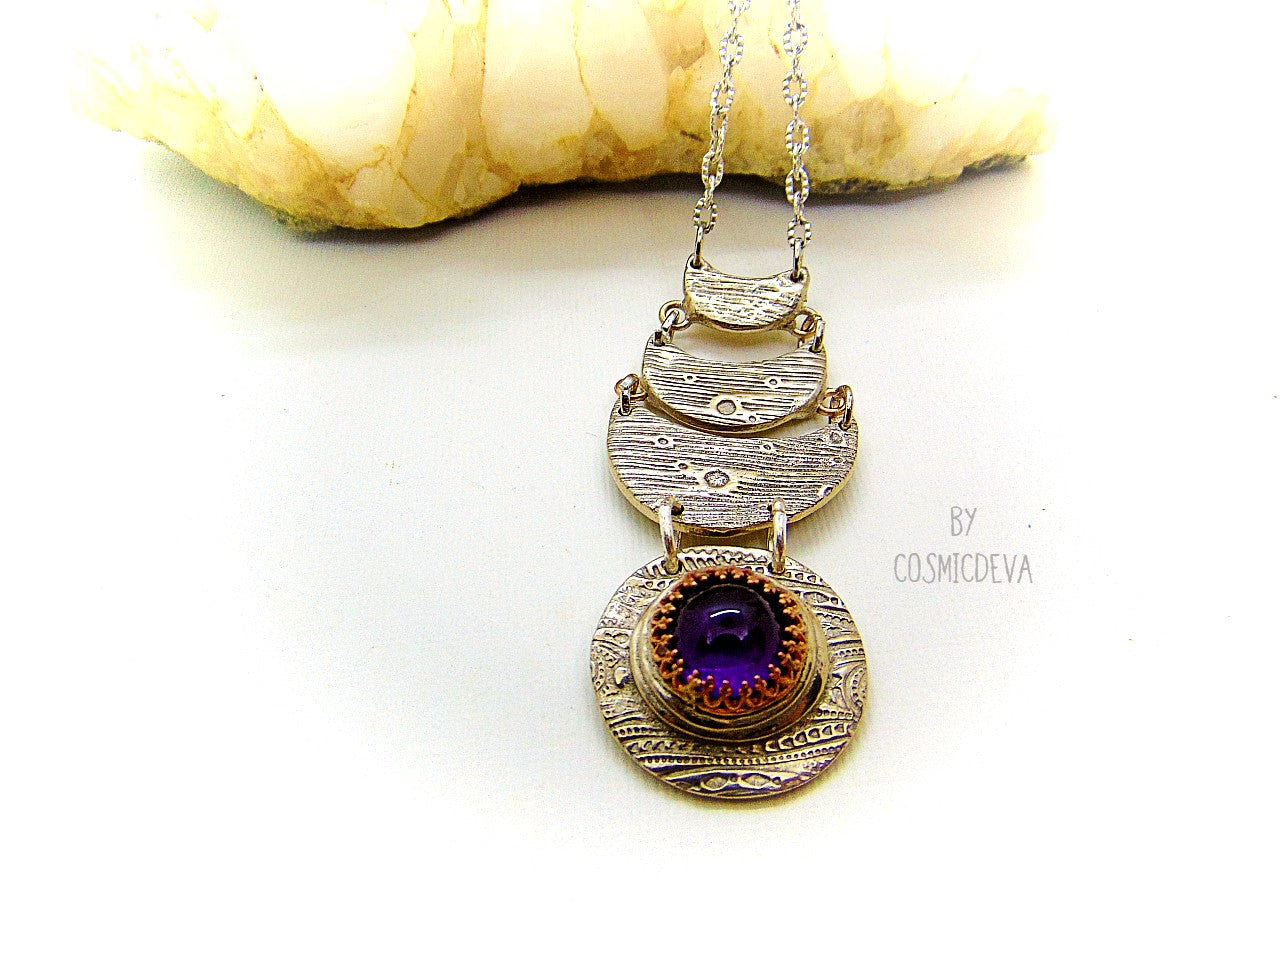 Beautiful purple silver moon phase necklace with a natural amethyst cabochon as a focal point. This silver bronze crescent moon pendant was completely hand formed and kiln fired. Silver bronze has the look of sterling silver but for a more affordable price. The moon pendant suspends from an 18 inch – 20-inch-long chain.